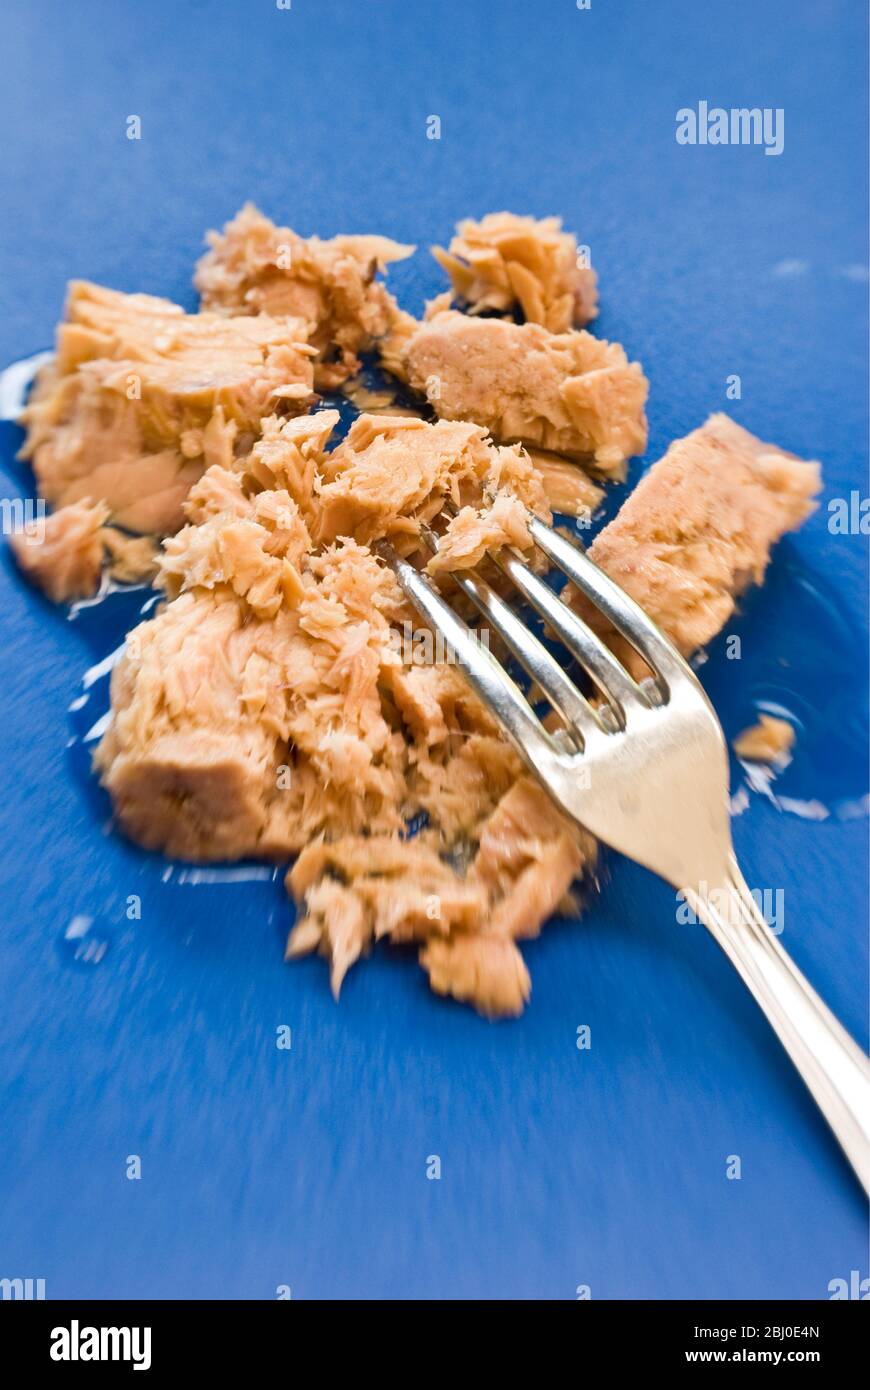 Canned tuna in olive oil turned out onto blue surface - Stock Photo